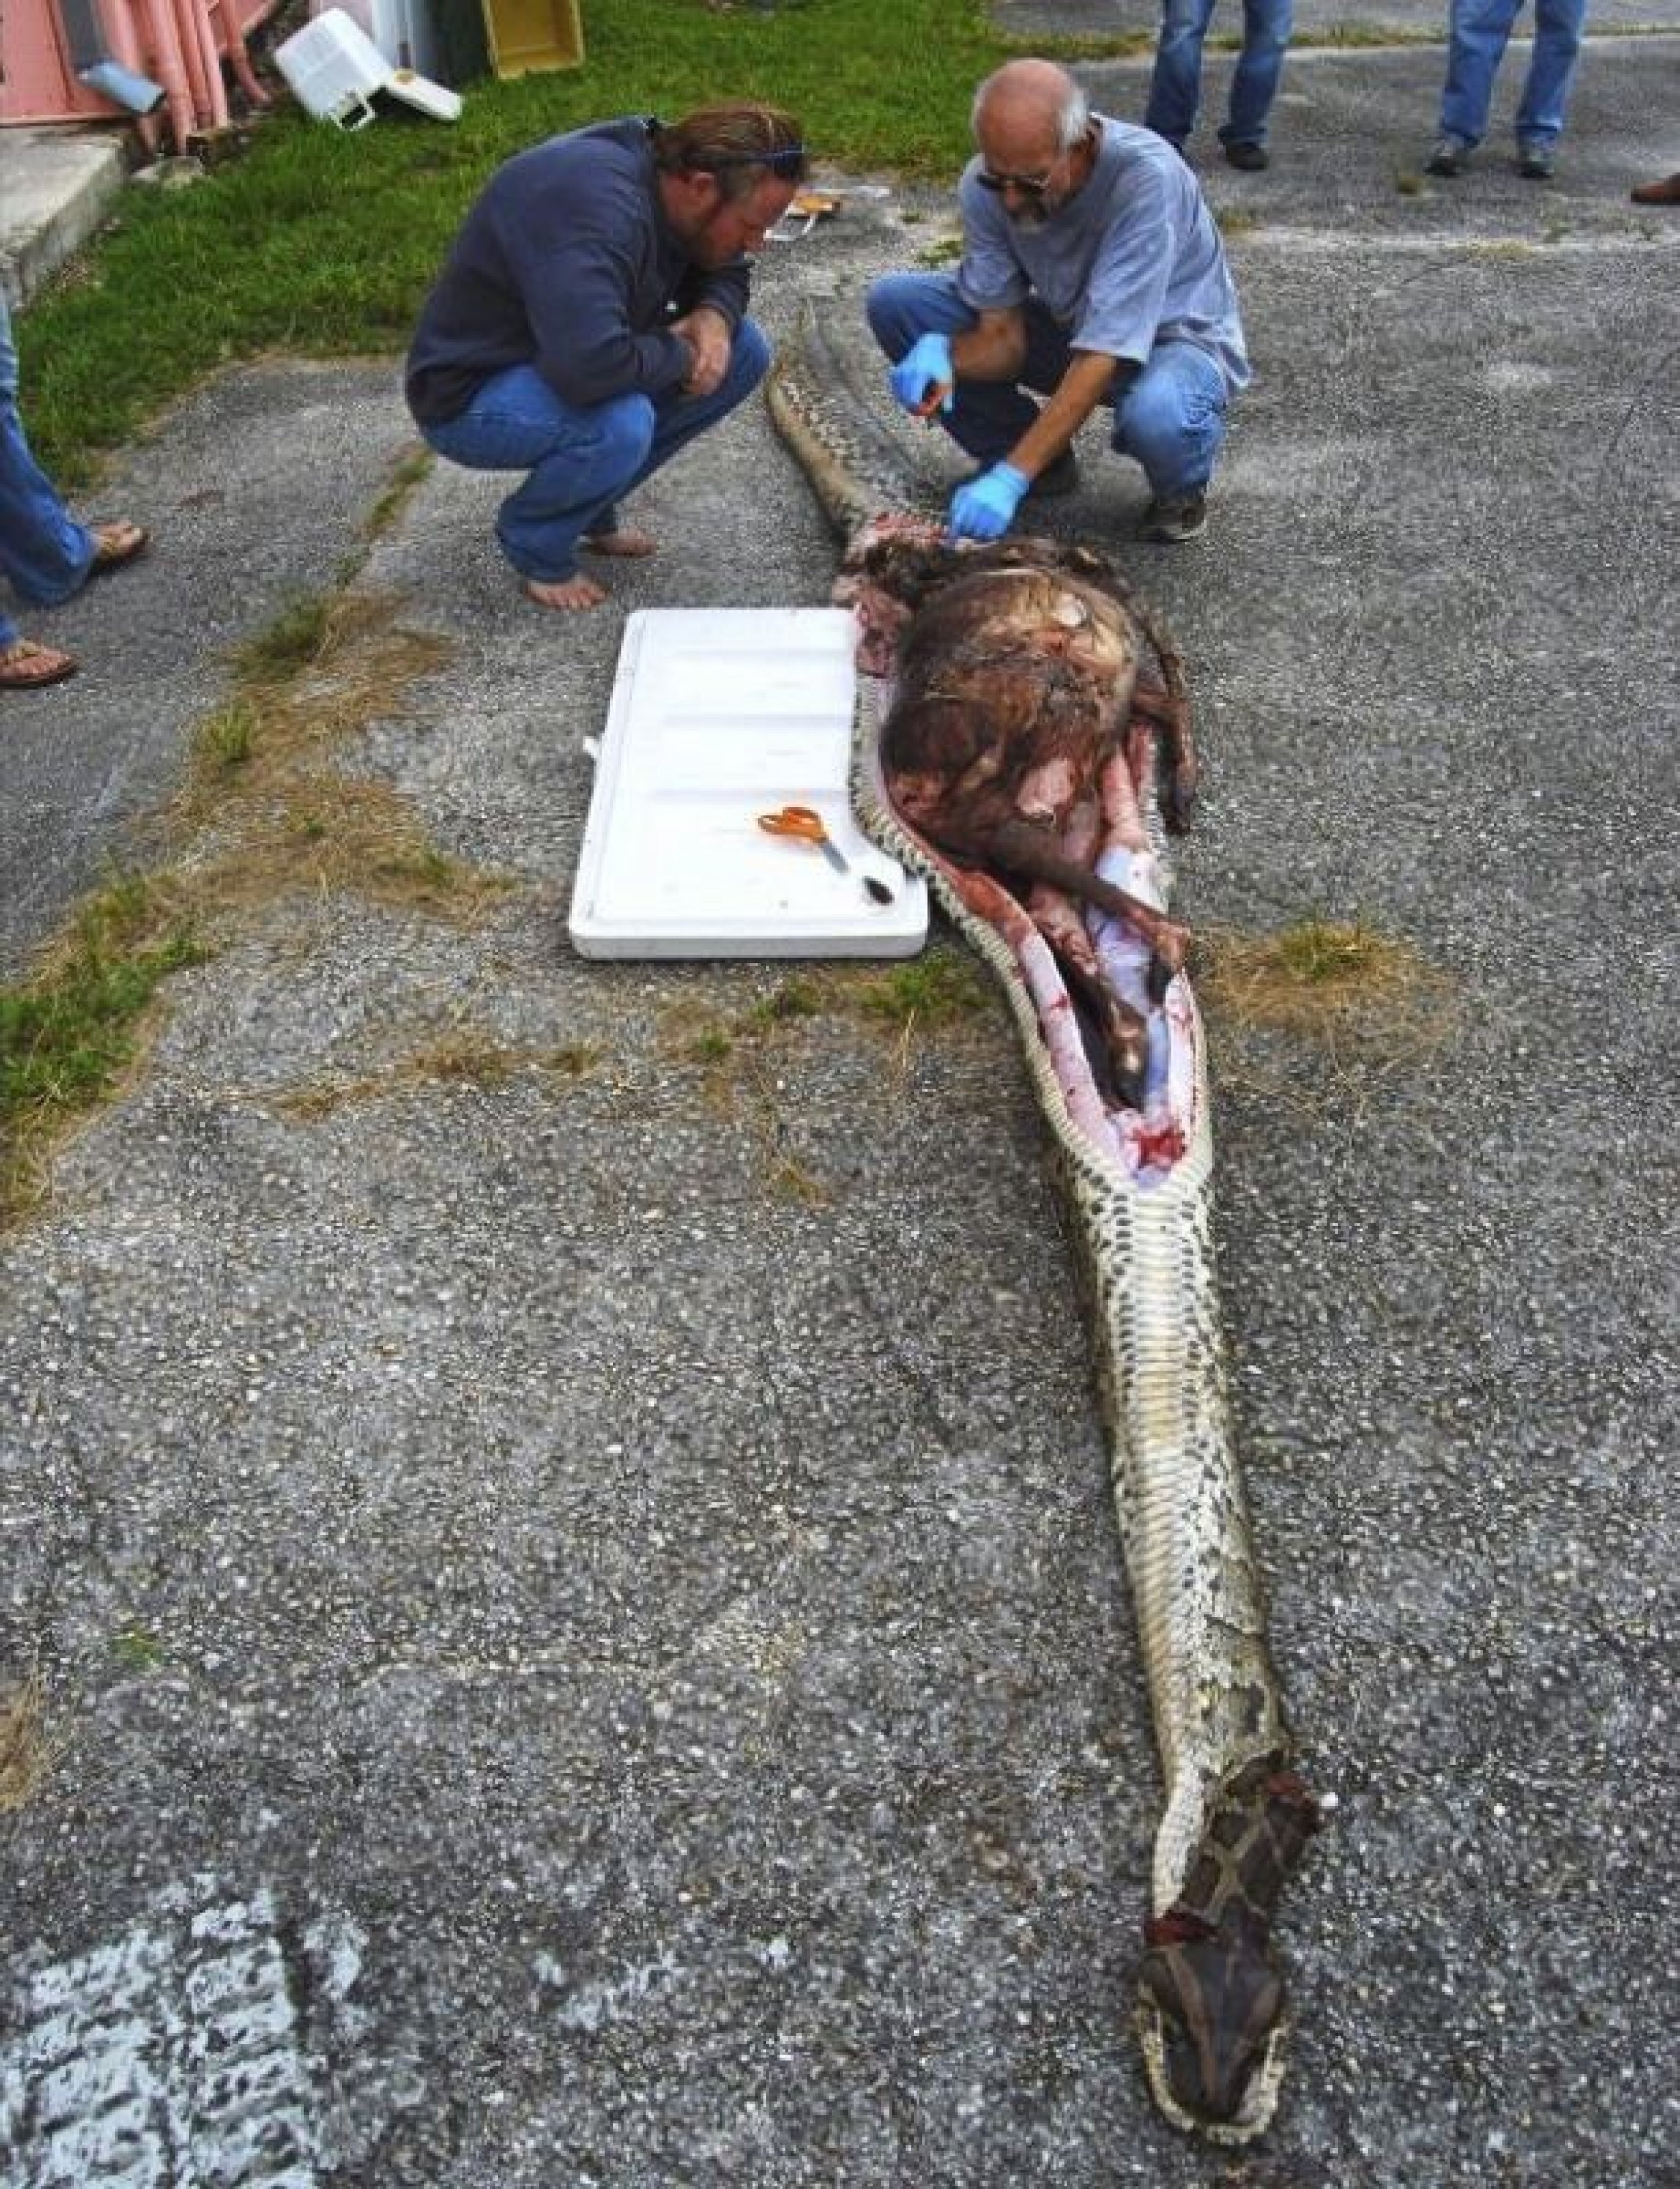 The reptile that had recently consumed a 76-pound adult female deer was one of the largest ever found in South Florida.